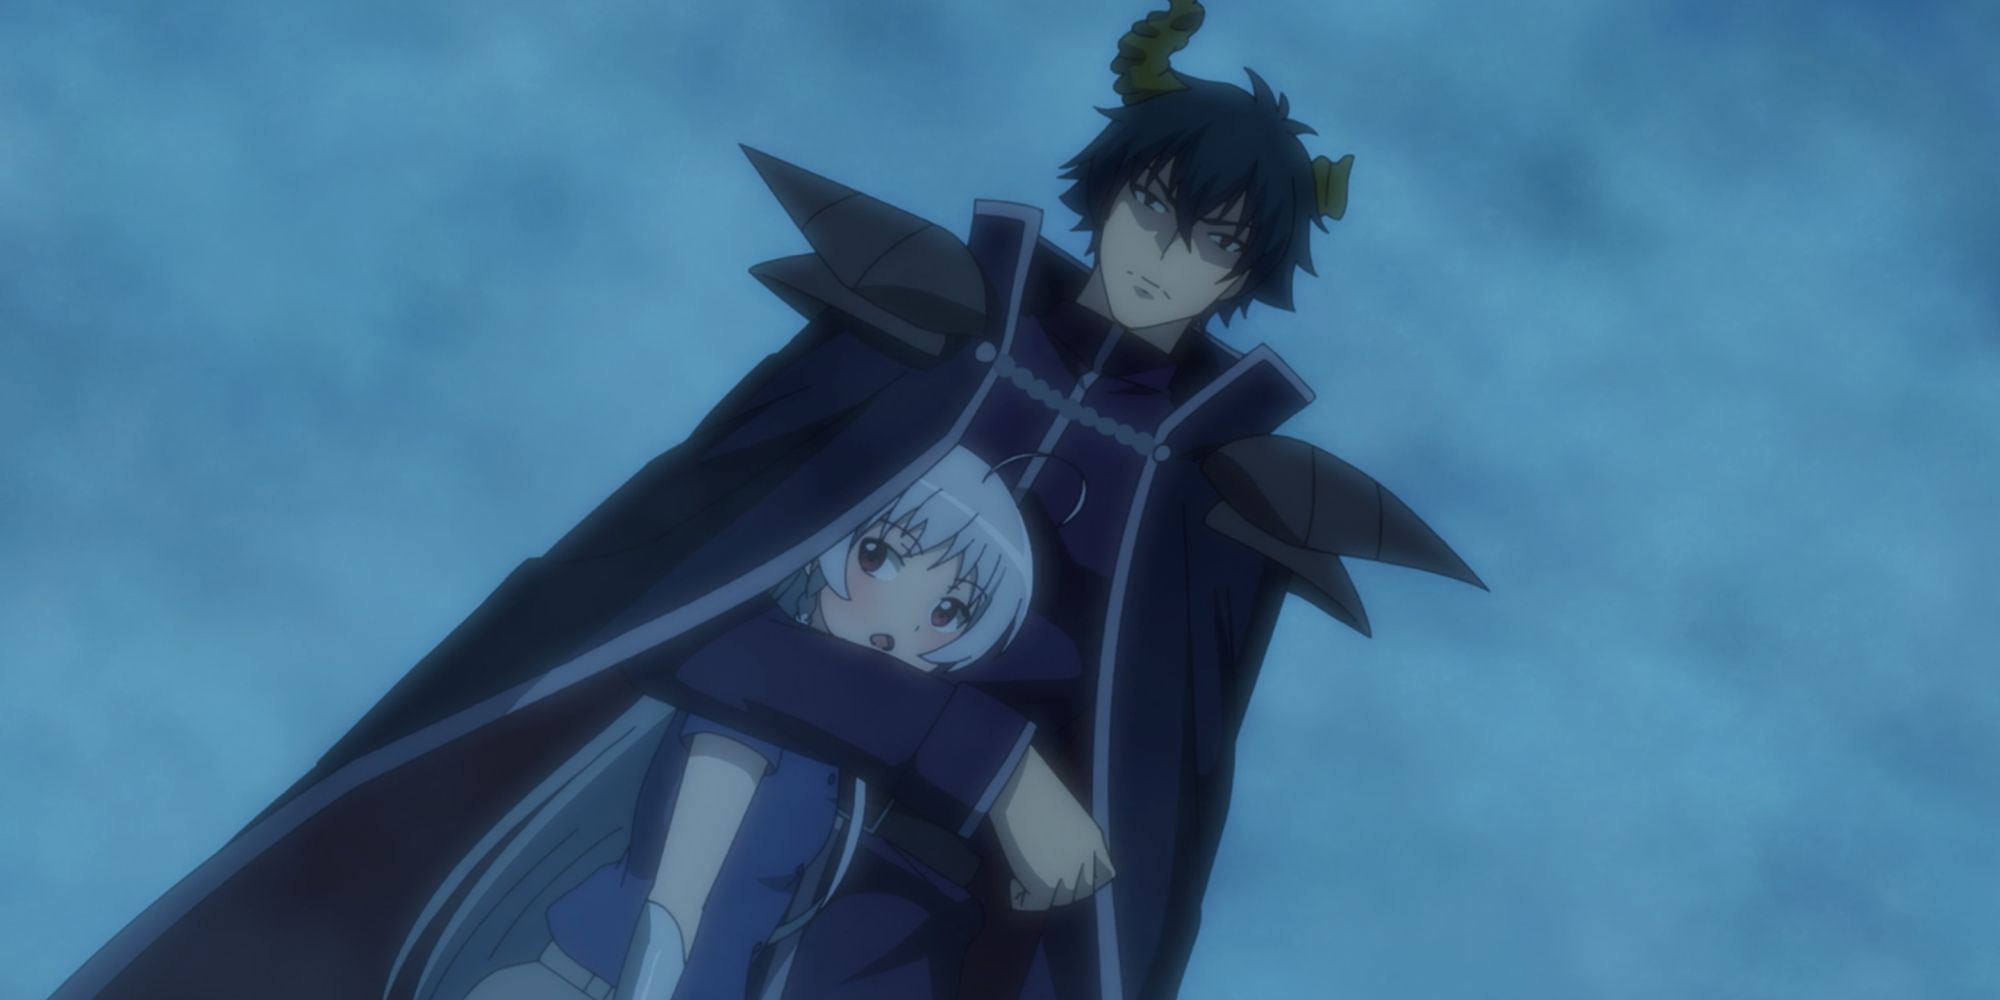 Maou as Satan holds Emi as Emilia under his cloak in The Devil Is a Part-Timer!.